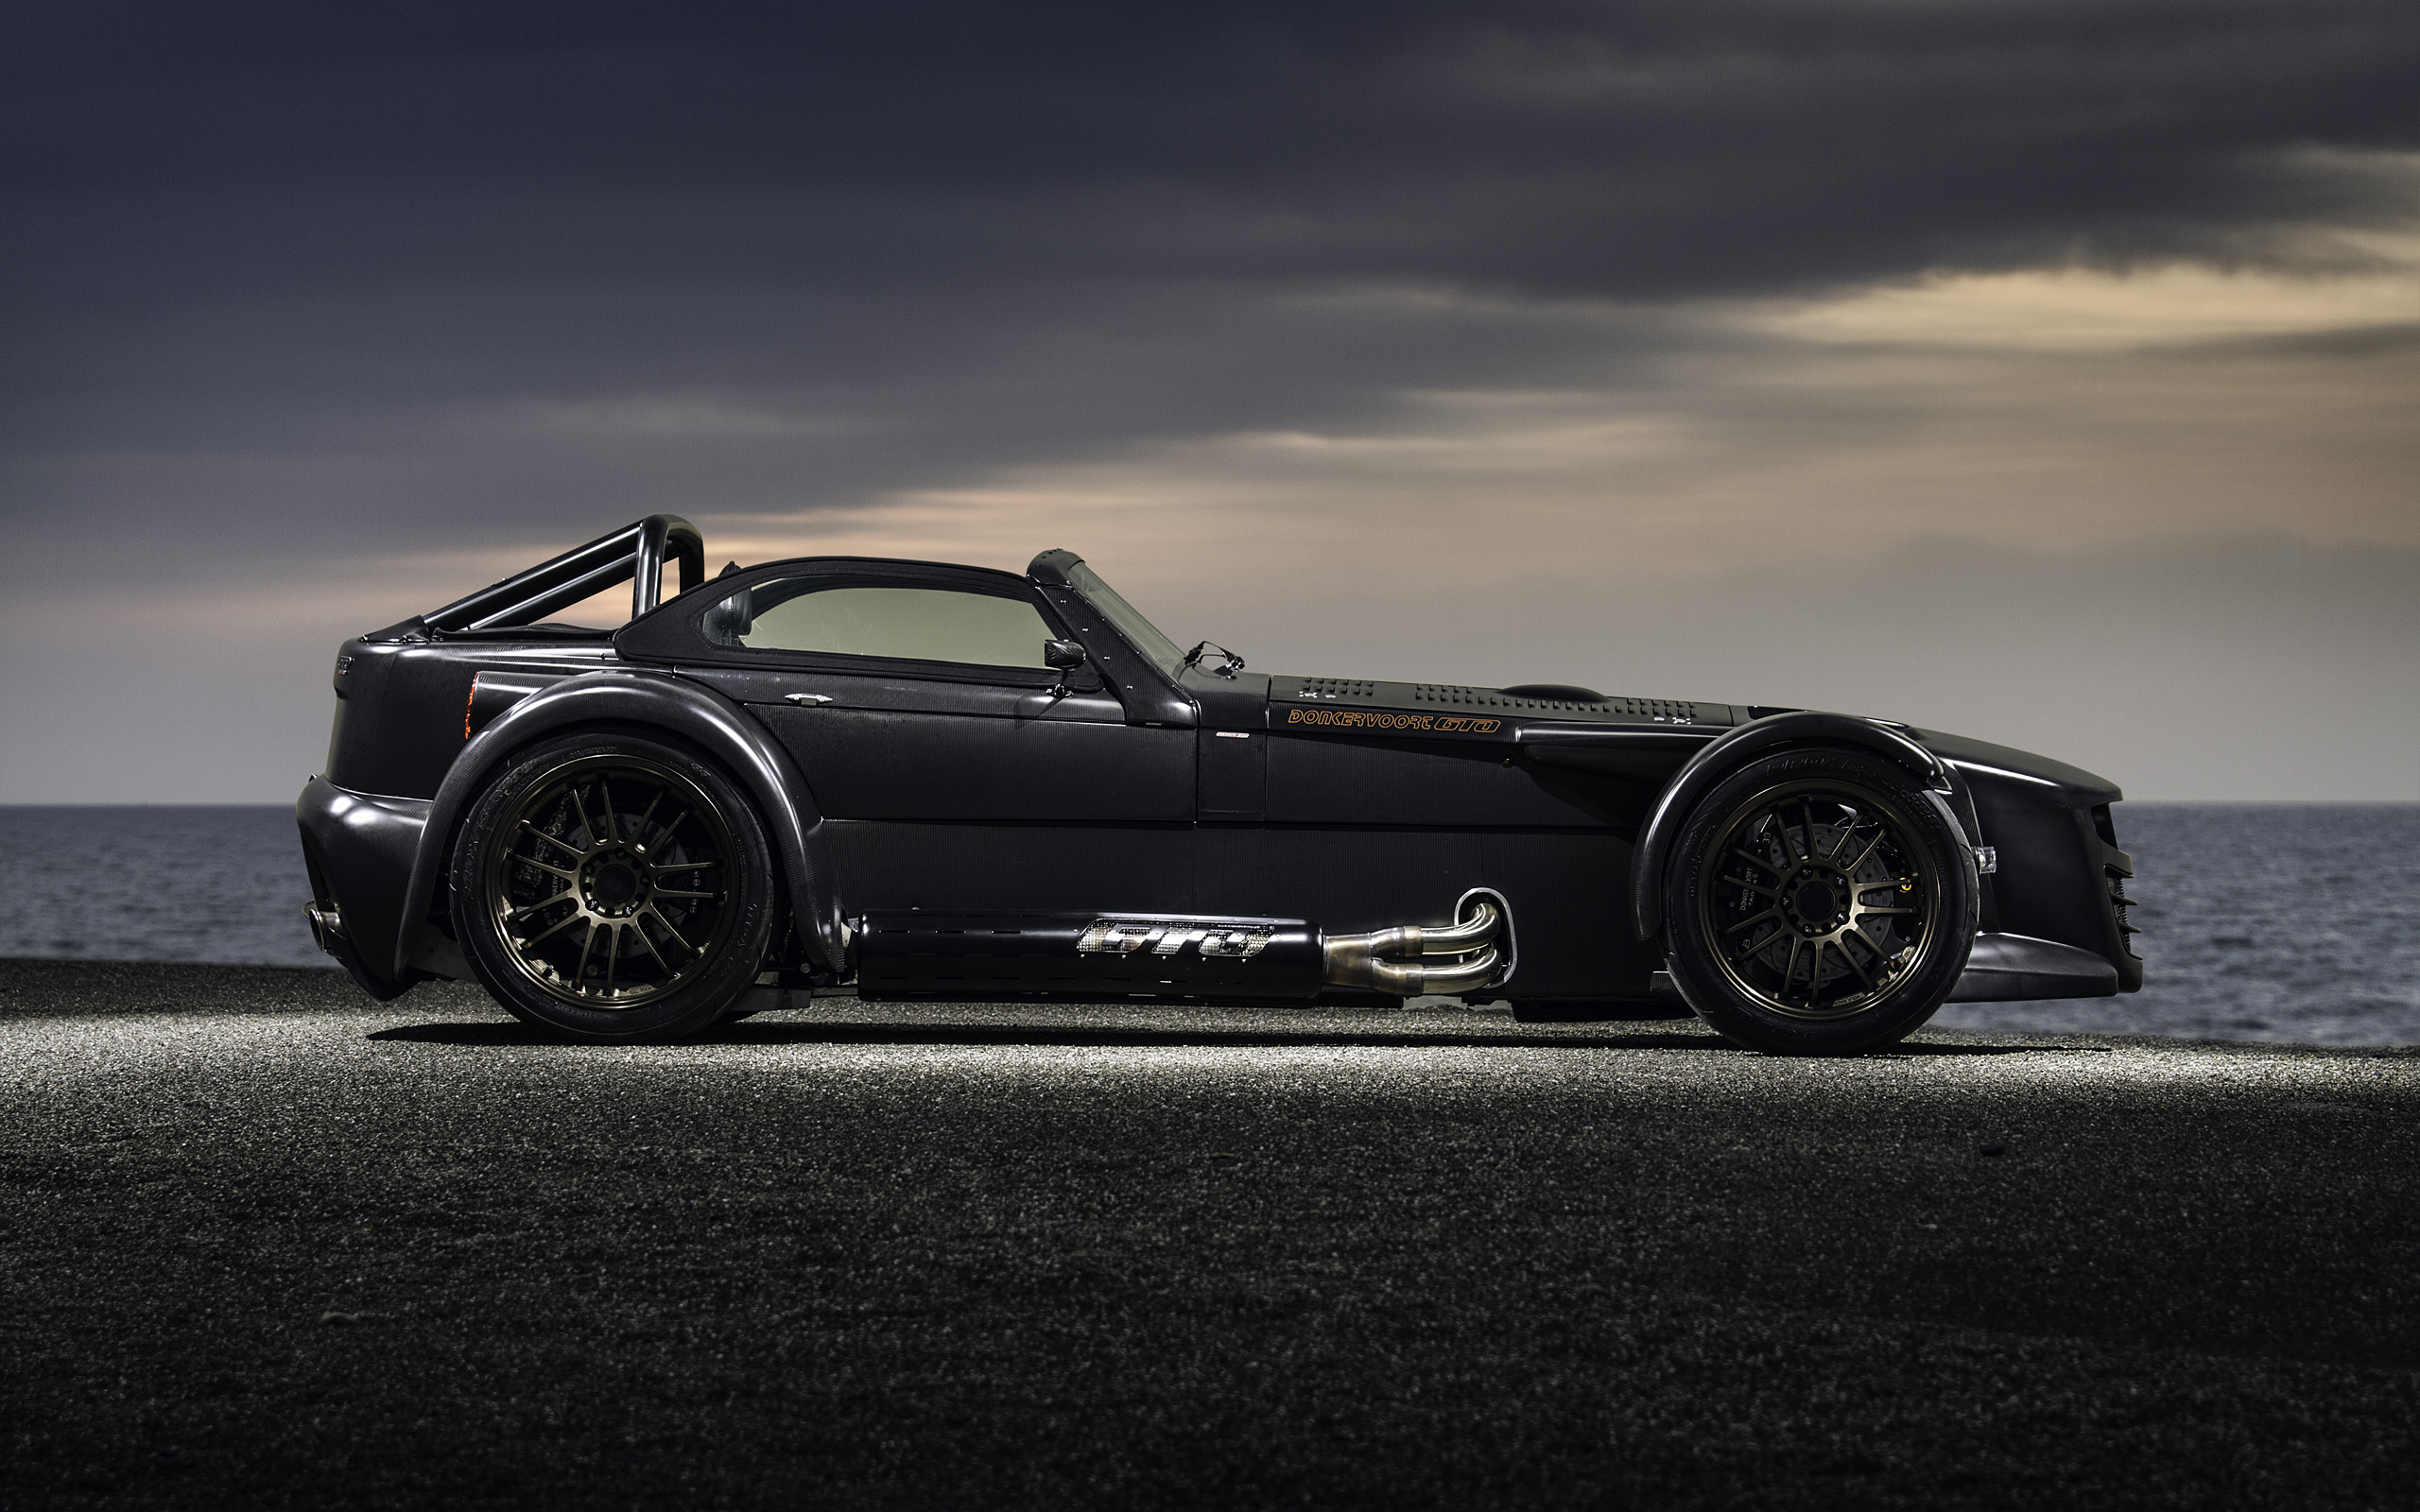  2015 Donkervoort D8 GTO Bare Naked Carbon Edition Wallpaper.